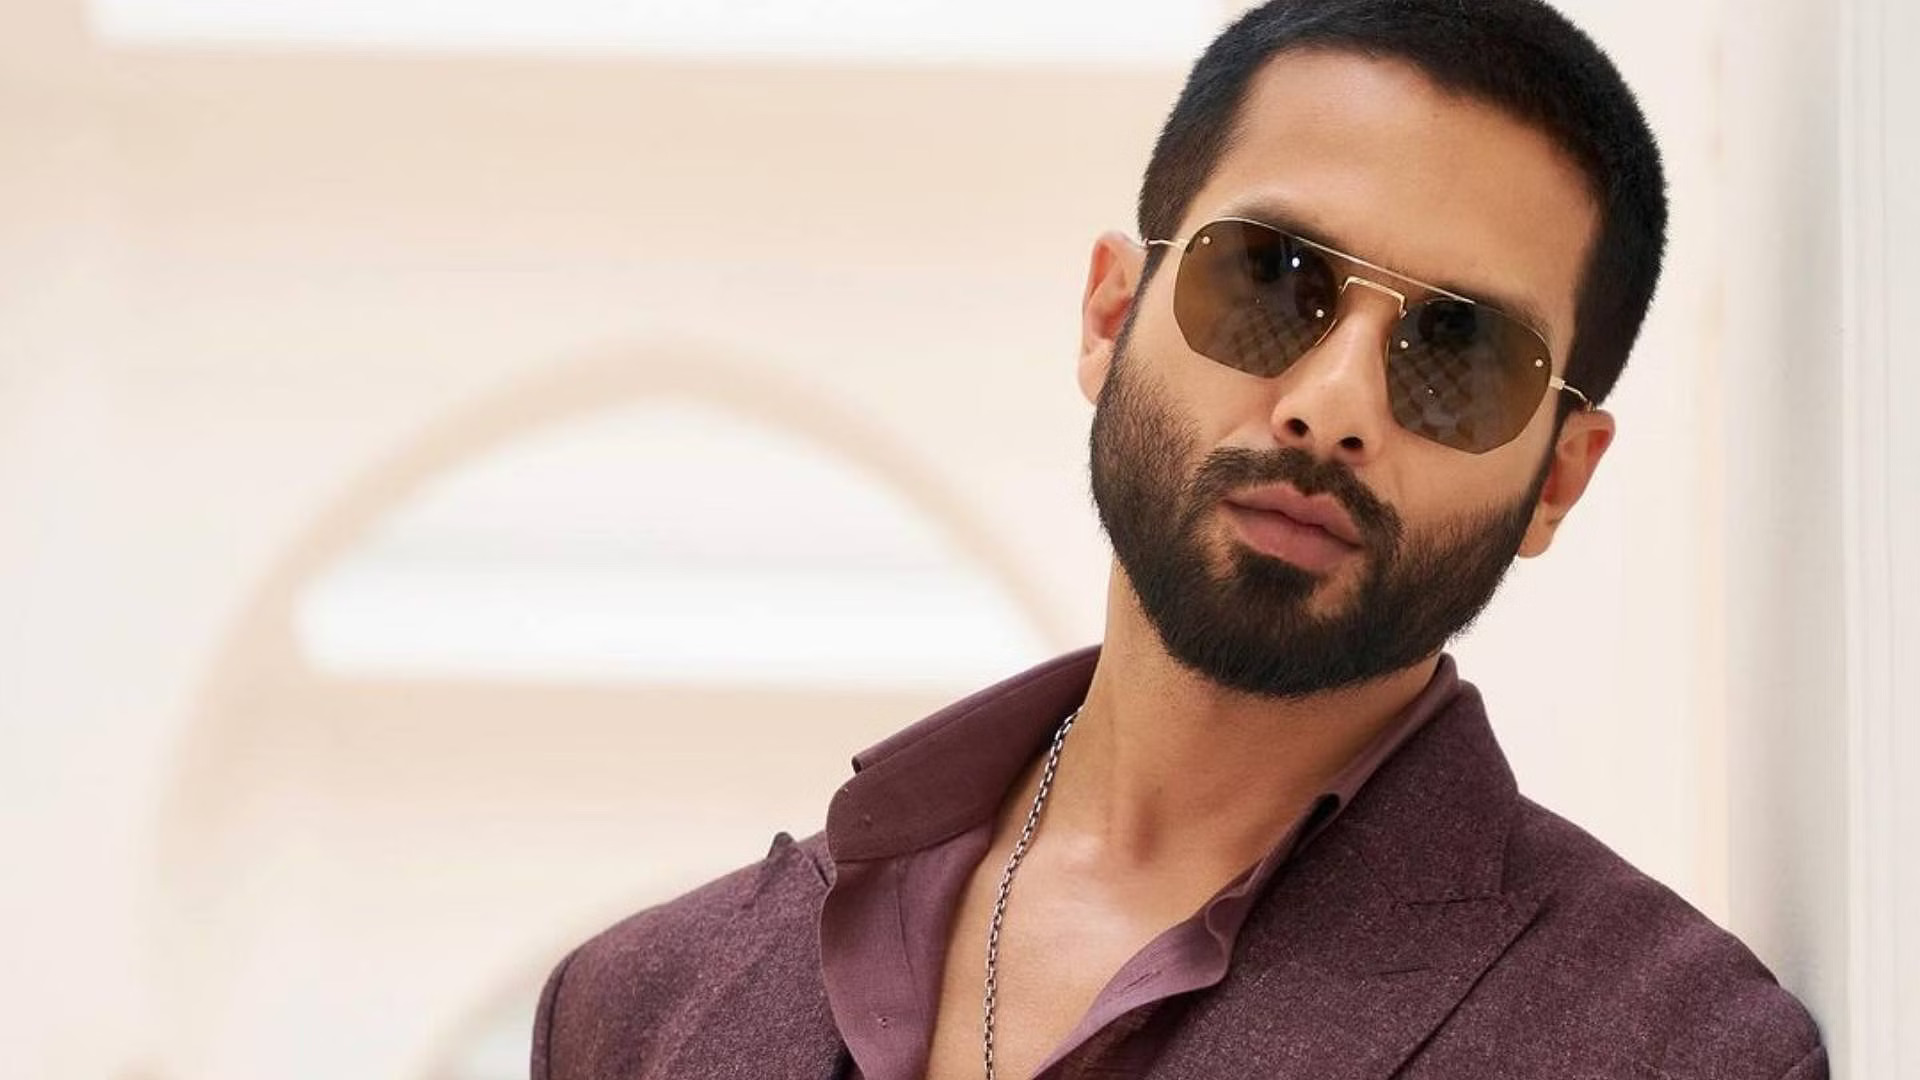 Shahid Kapoor Loses His Cool at Paps, Tells Them to ‘Behave’ | Watch